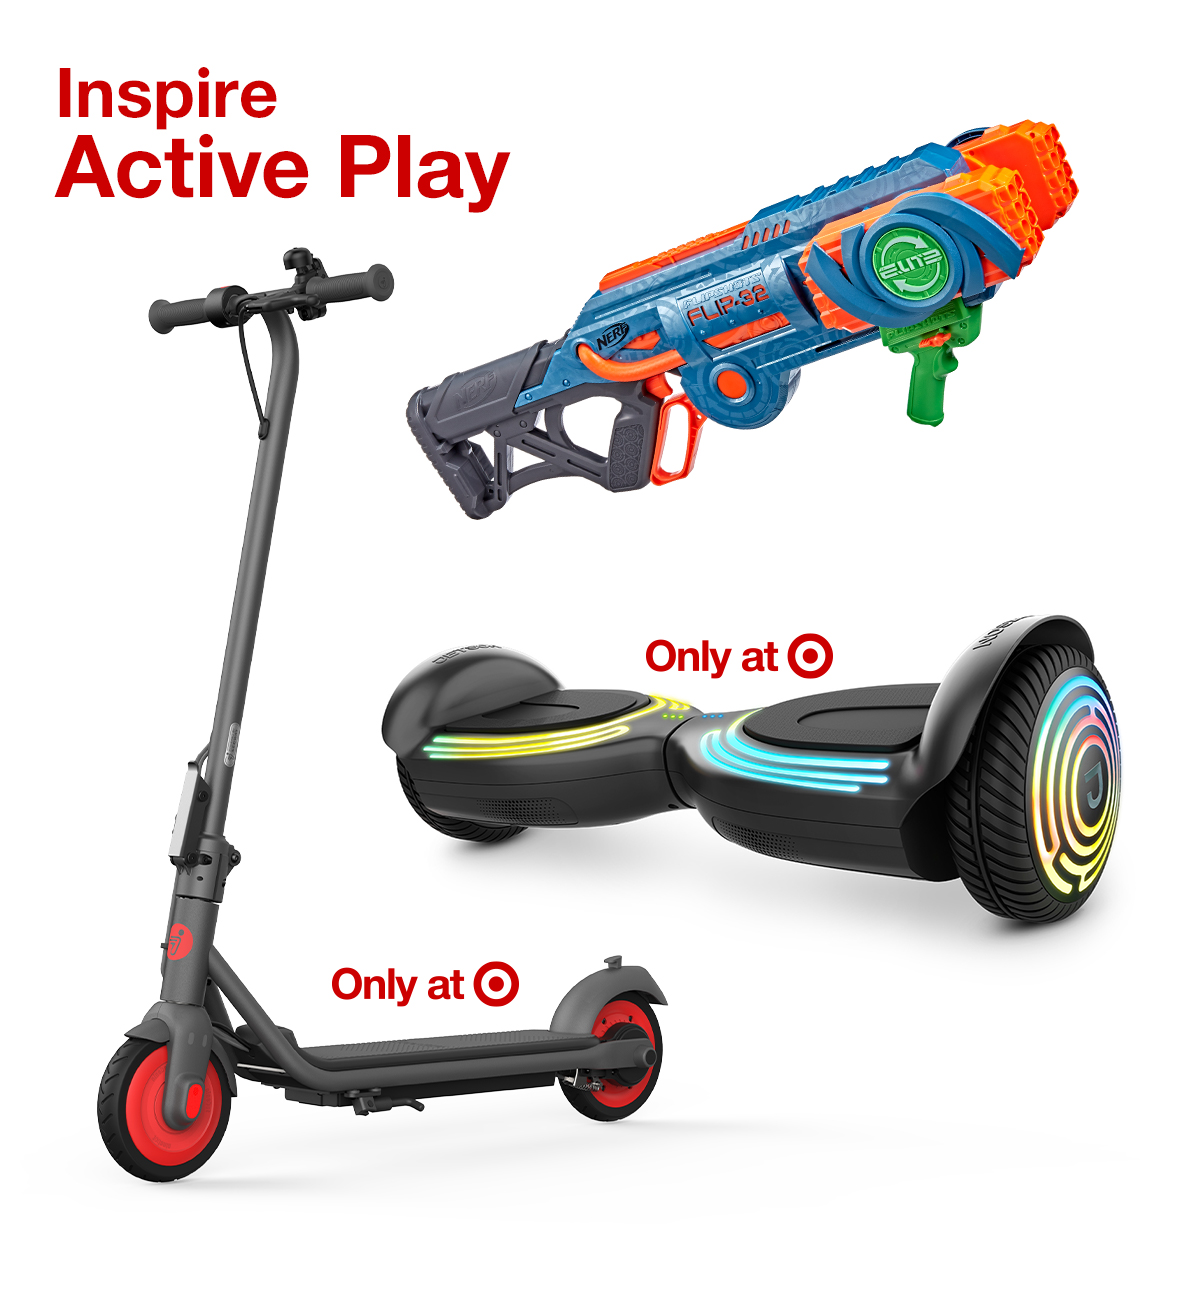 Pictures of electric scooter, hoverboard and NERF gun that inspire active play